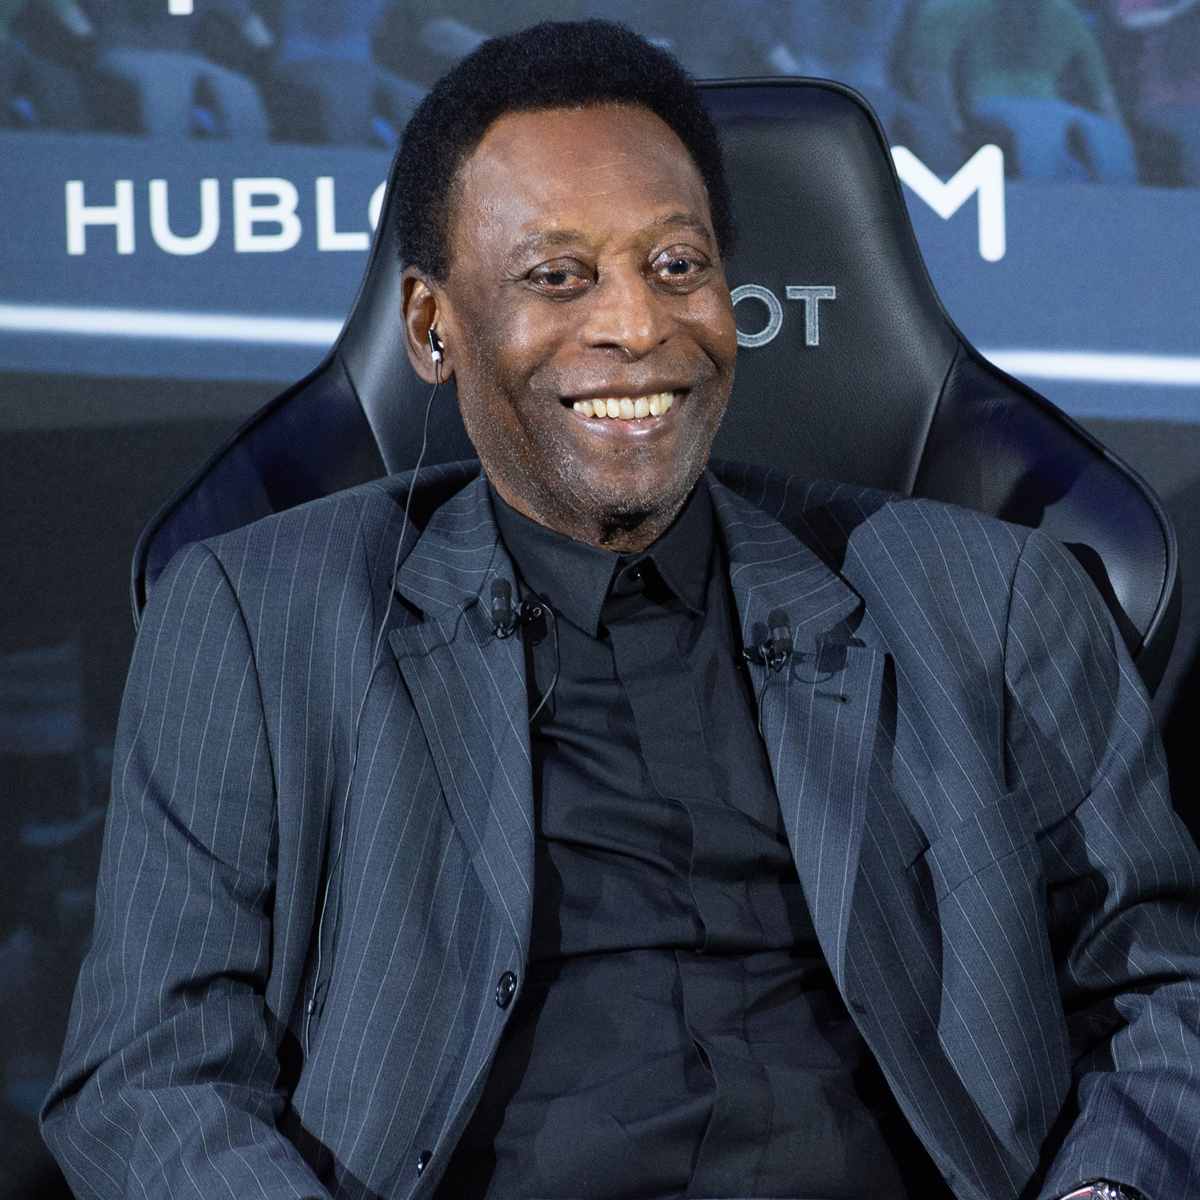 Pelé Daughter Gives Update on His Health Amid Hospitalization – E! Online